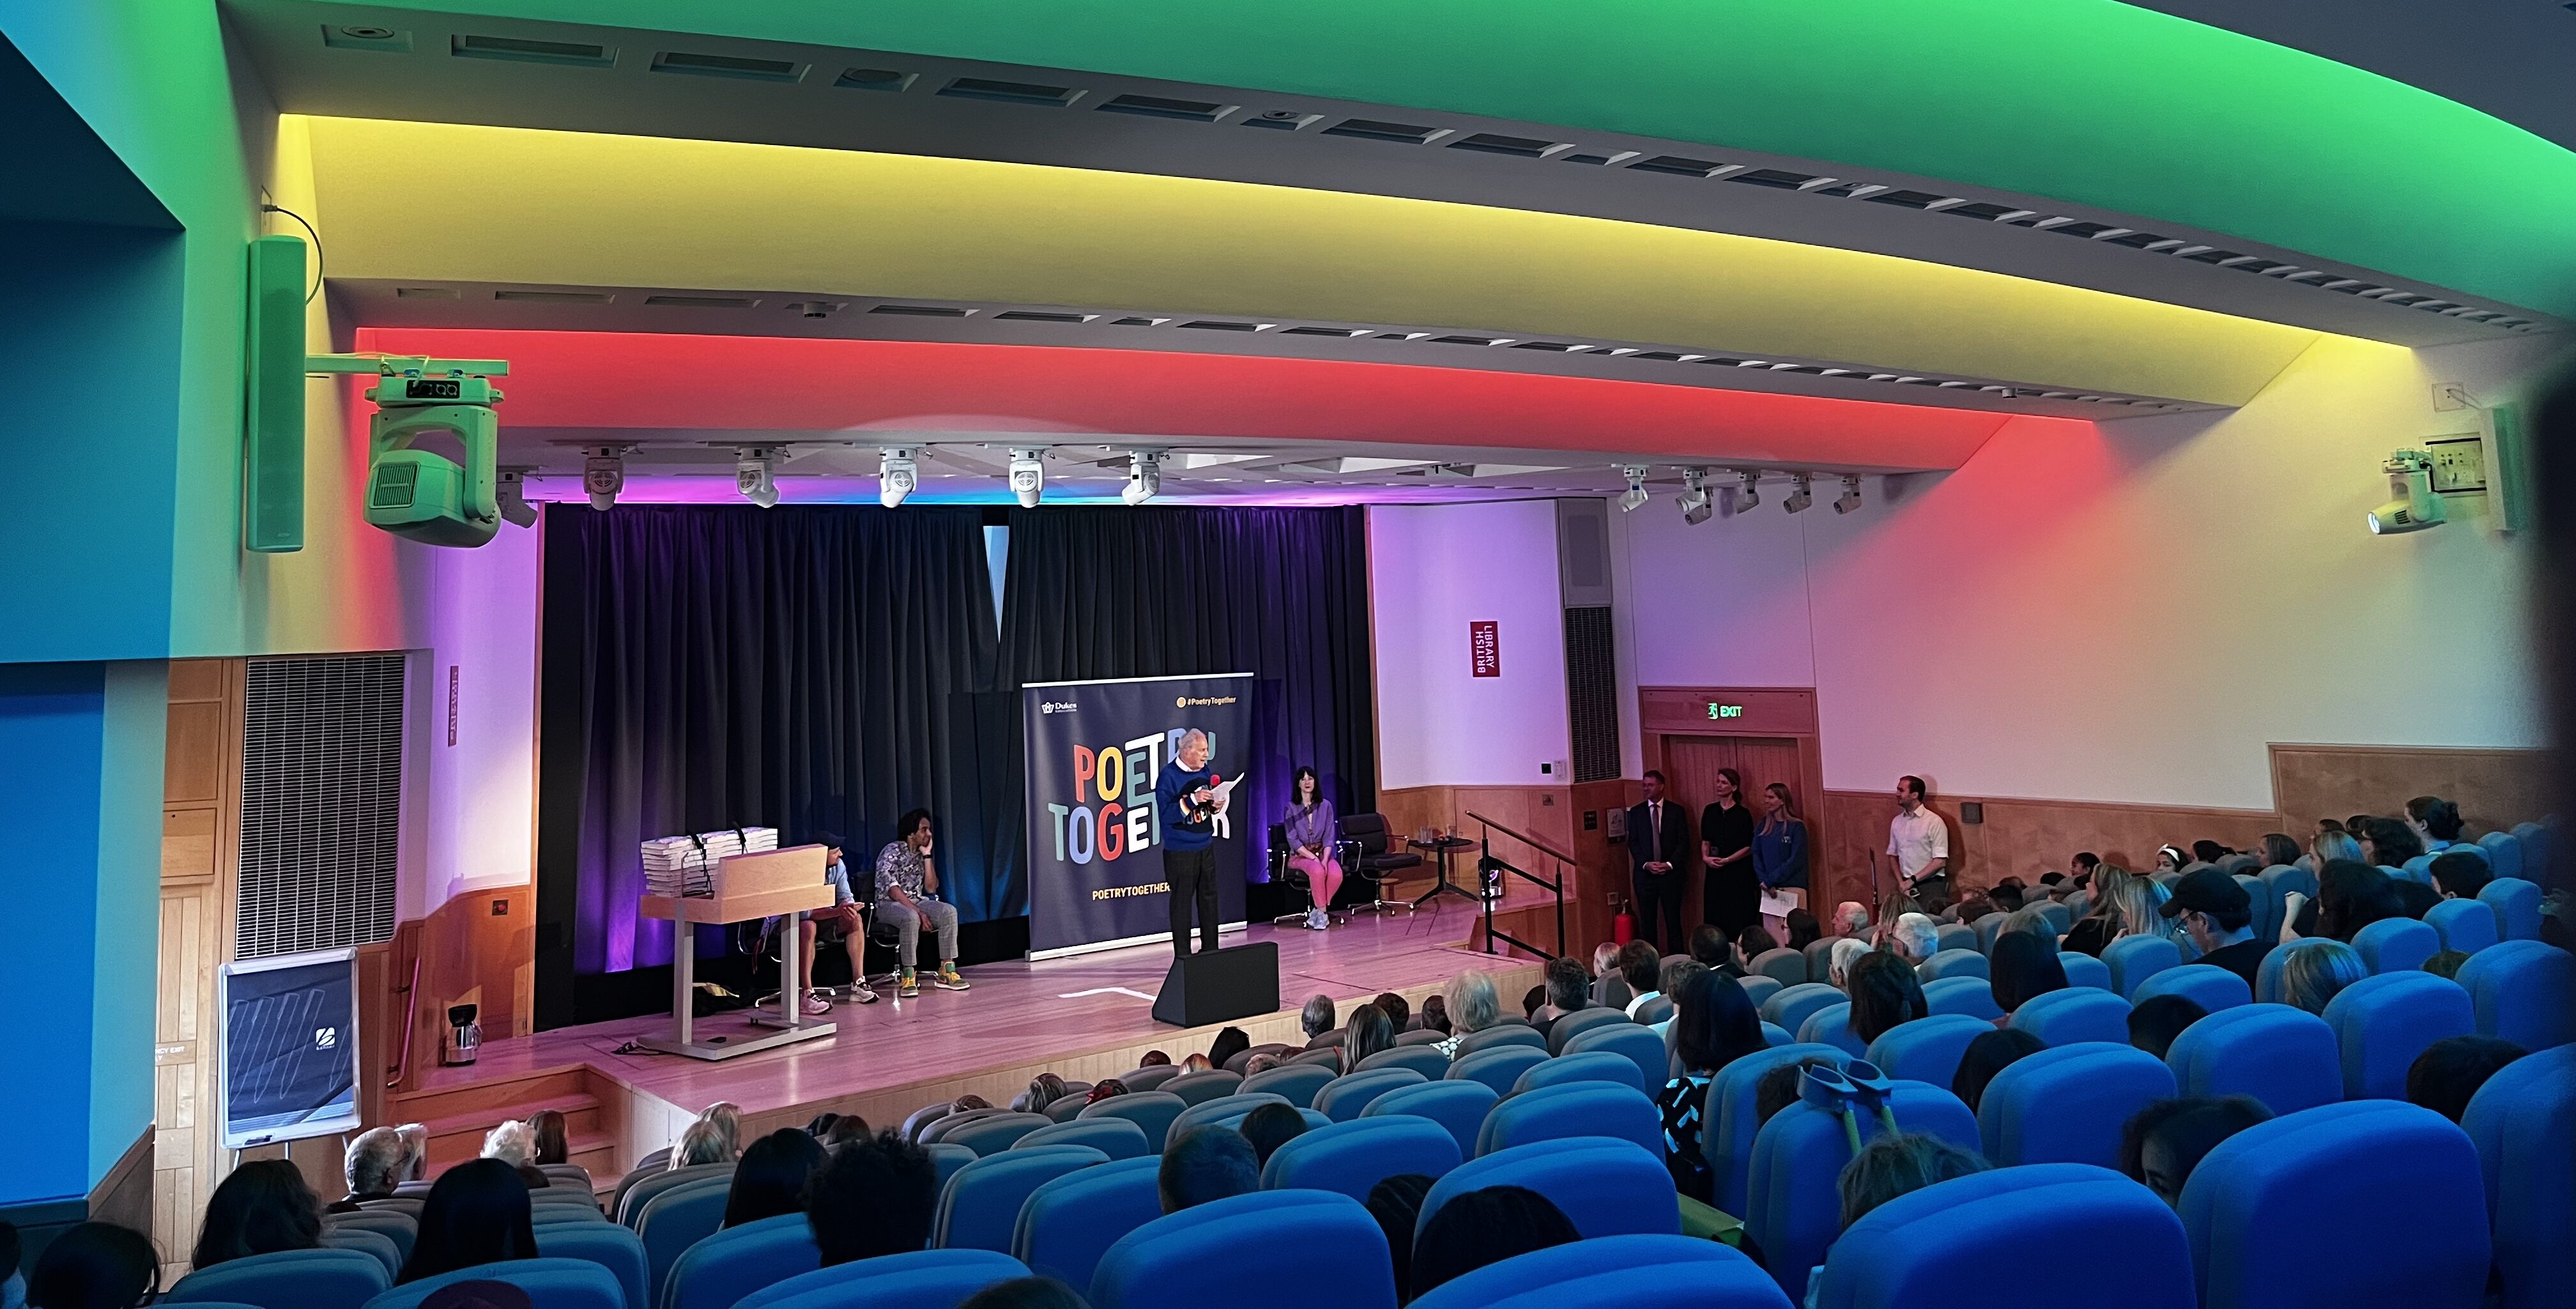 Poetry Together, an event by Dukes Education at The British Library